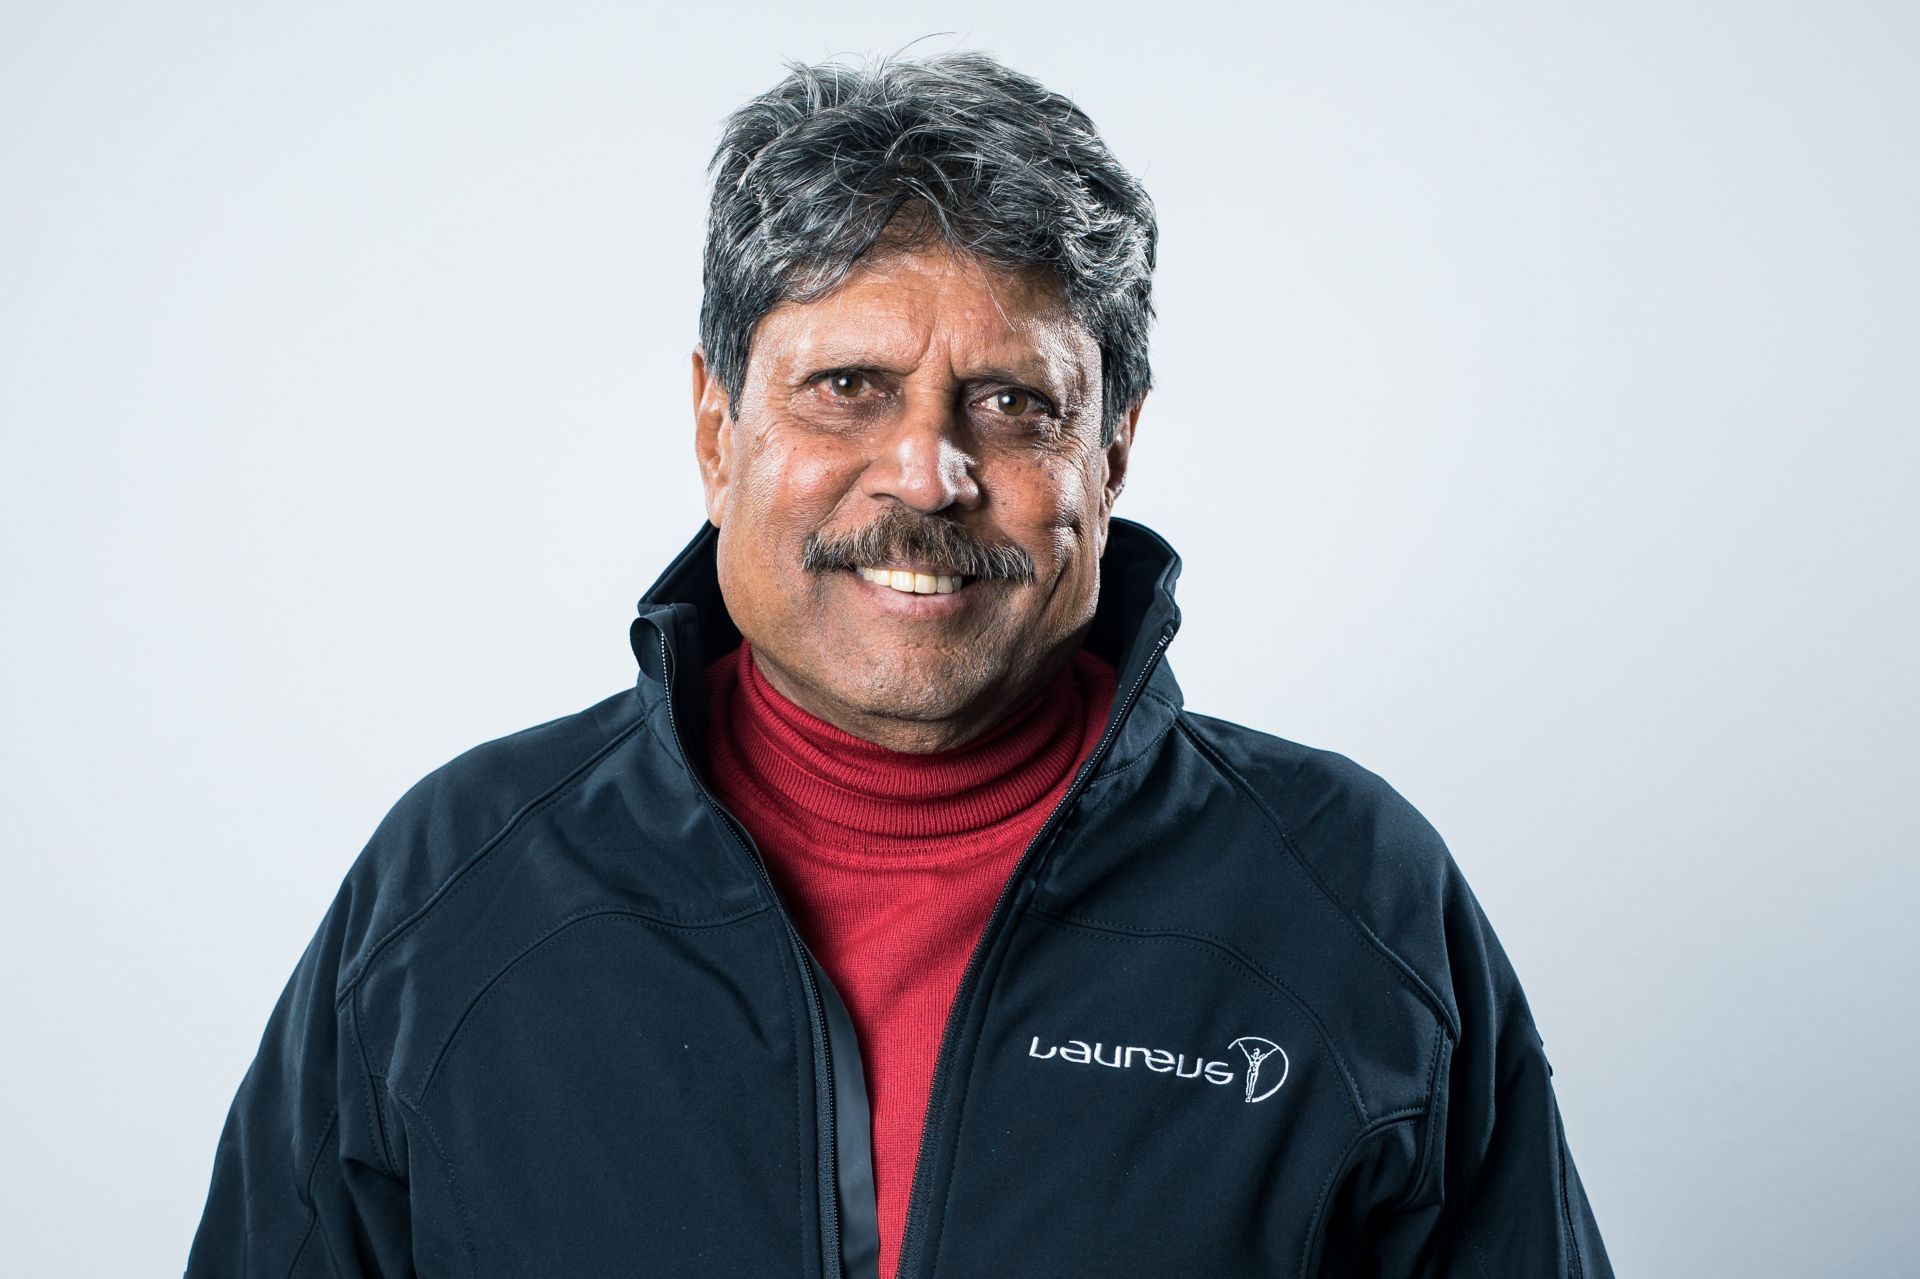 Kapil Dev is among the greatest all-rounders of all time